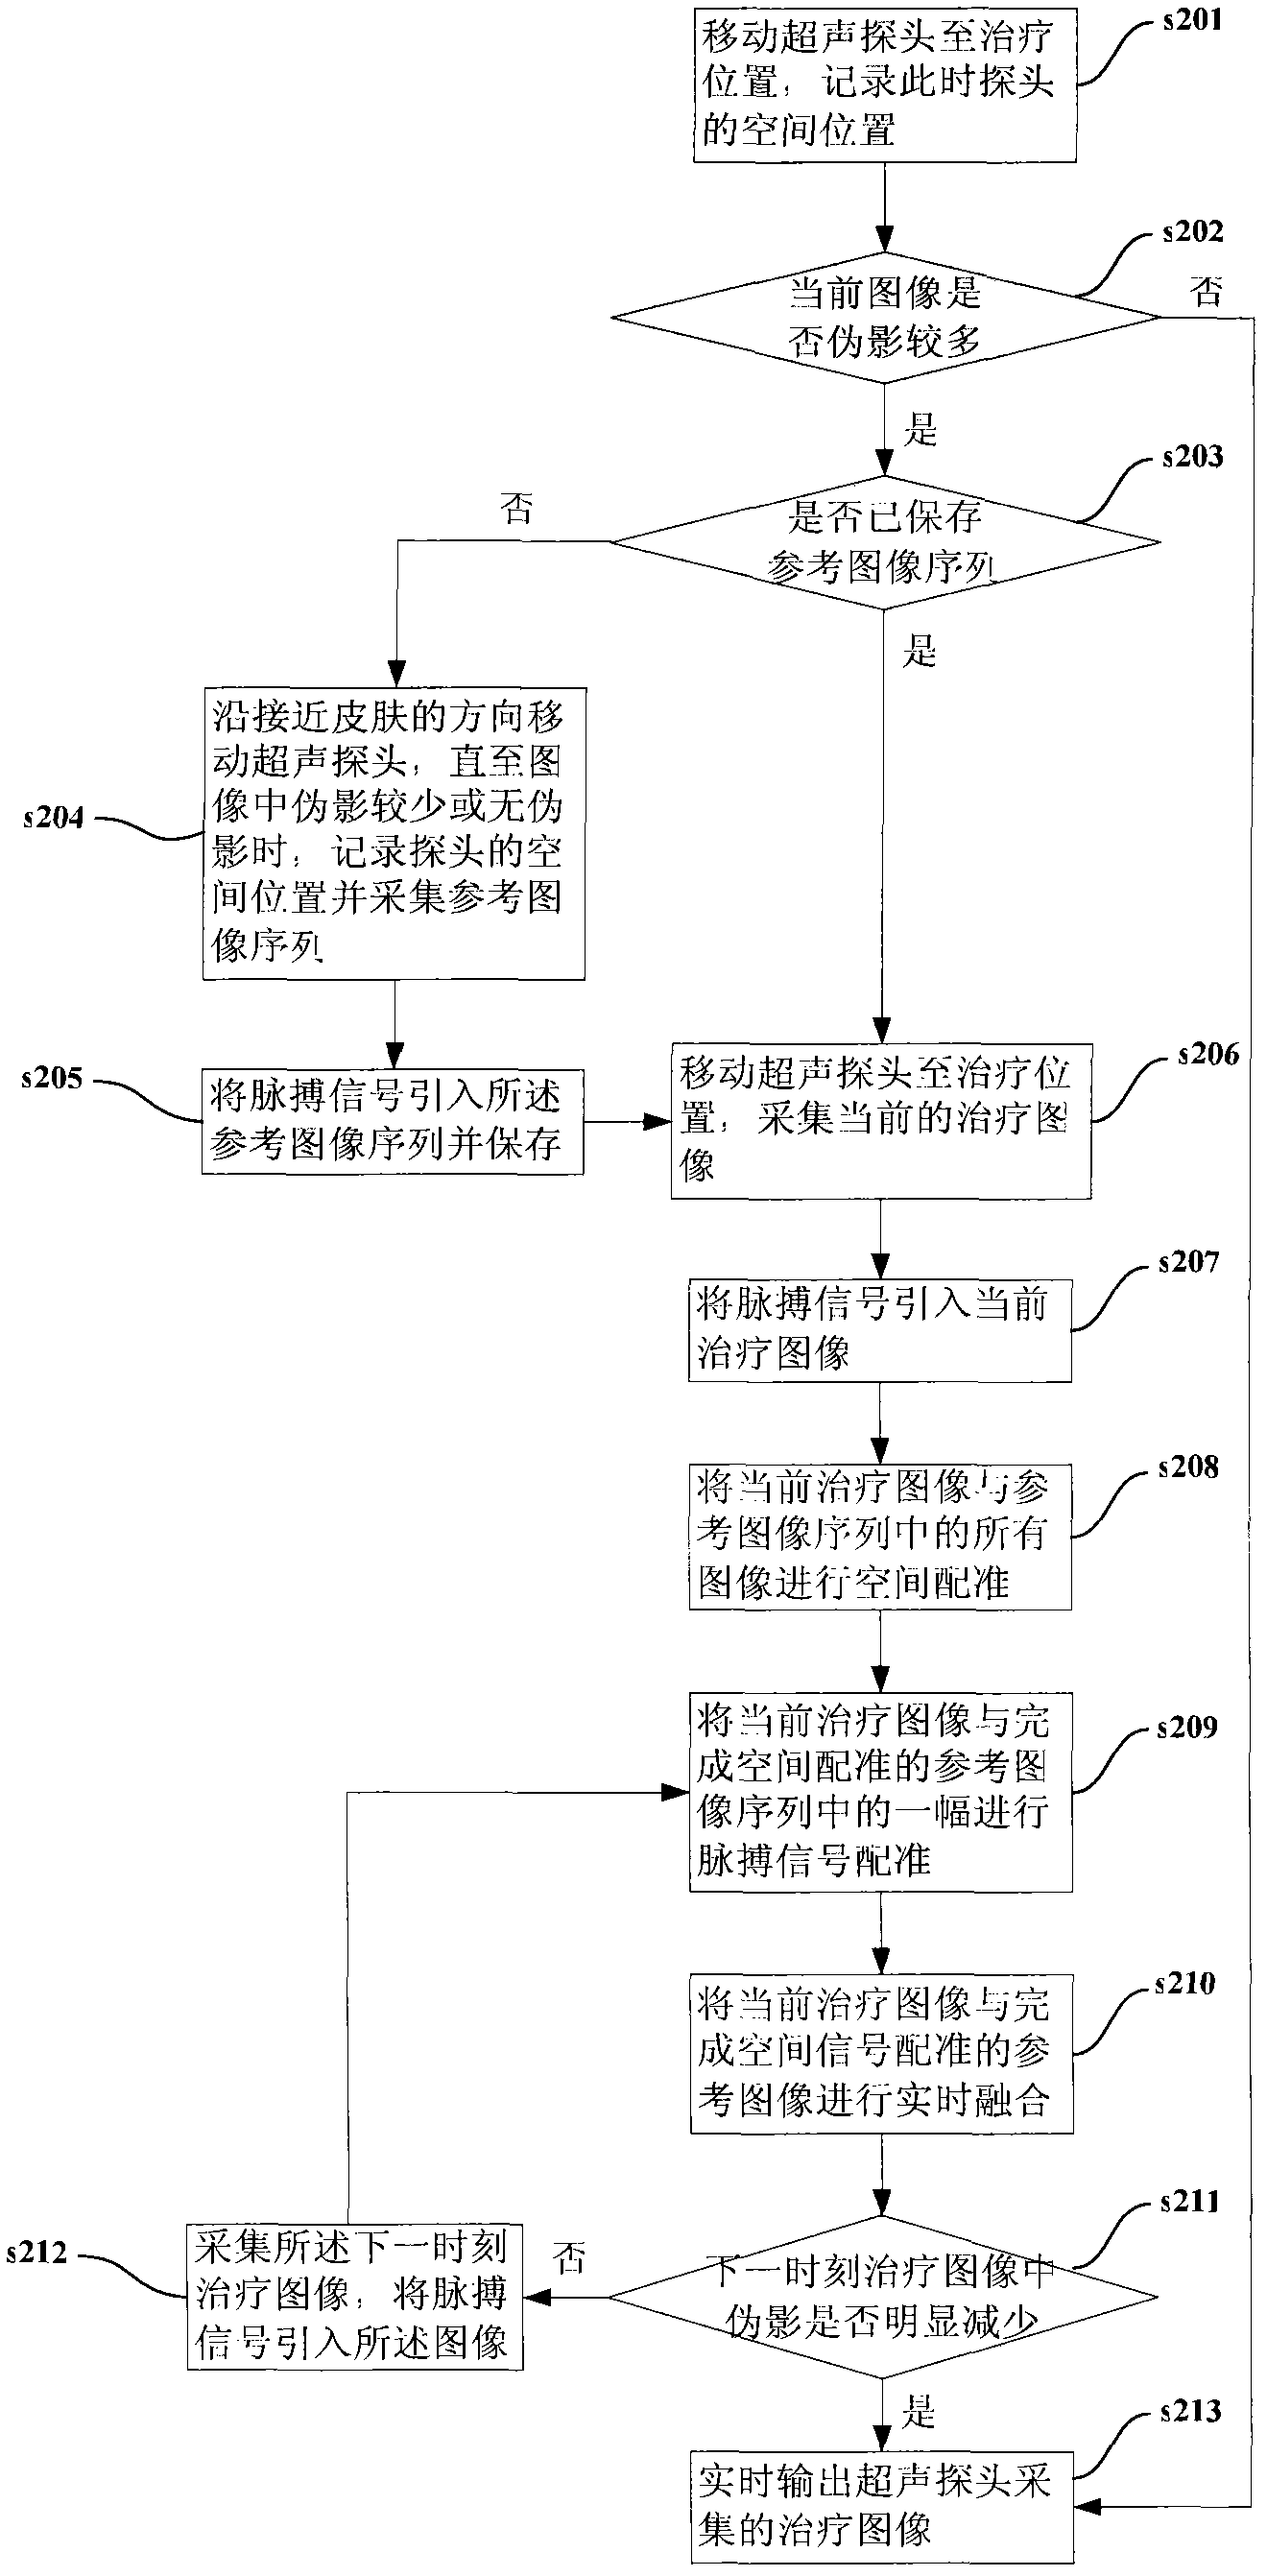 Method and device for reducing artifacts in image in real time